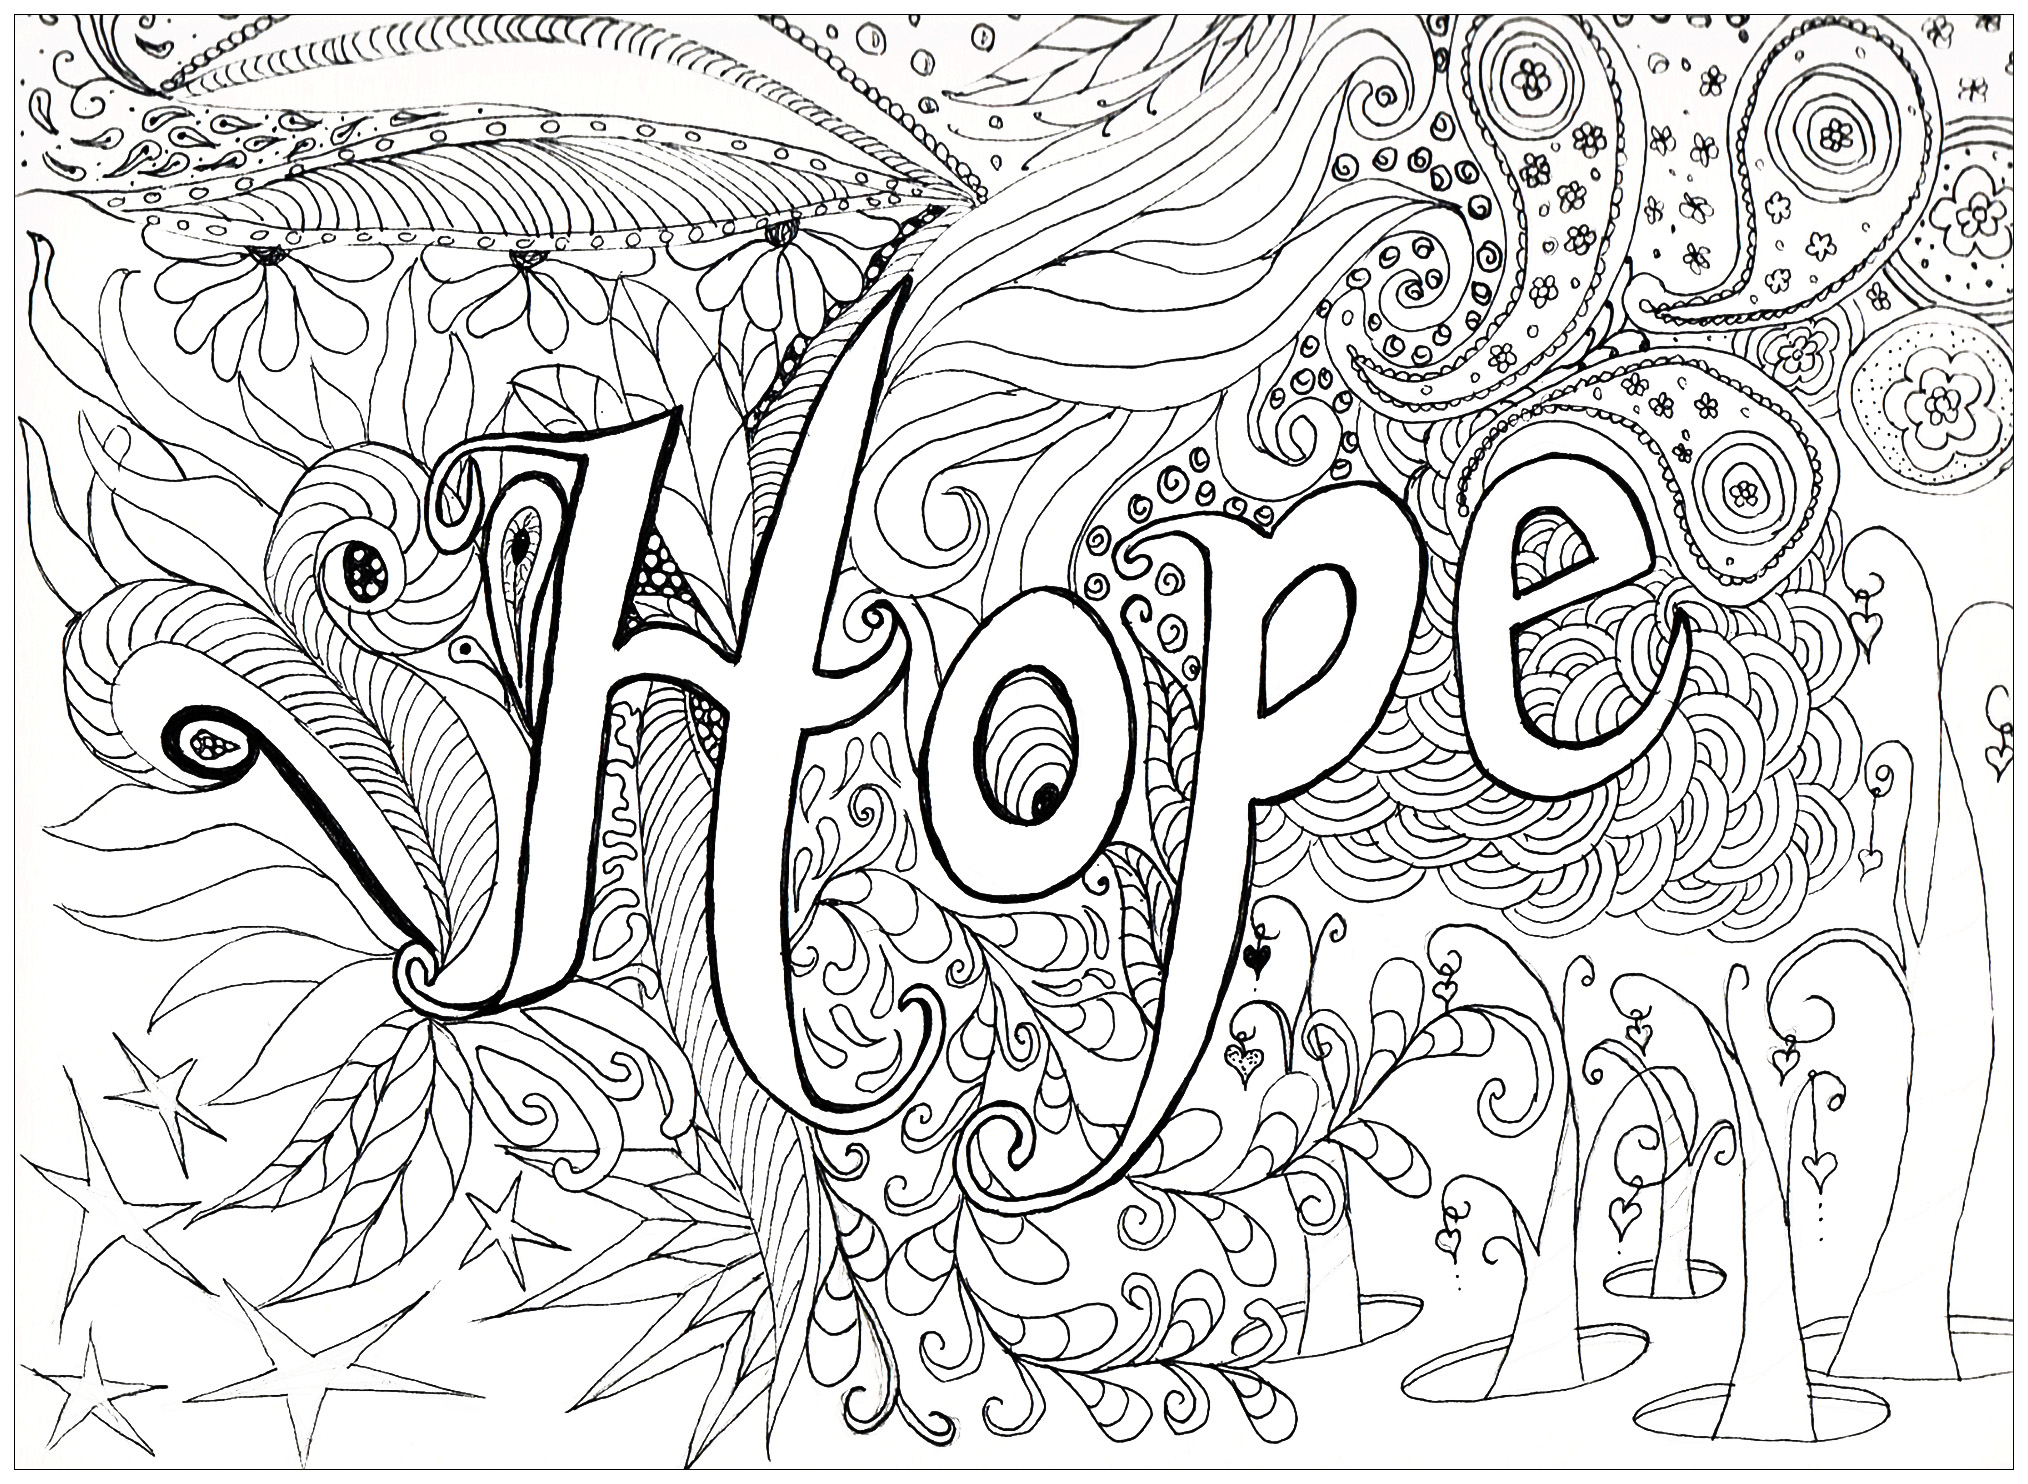 Download Hope - Anti stress Adult Coloring Pages